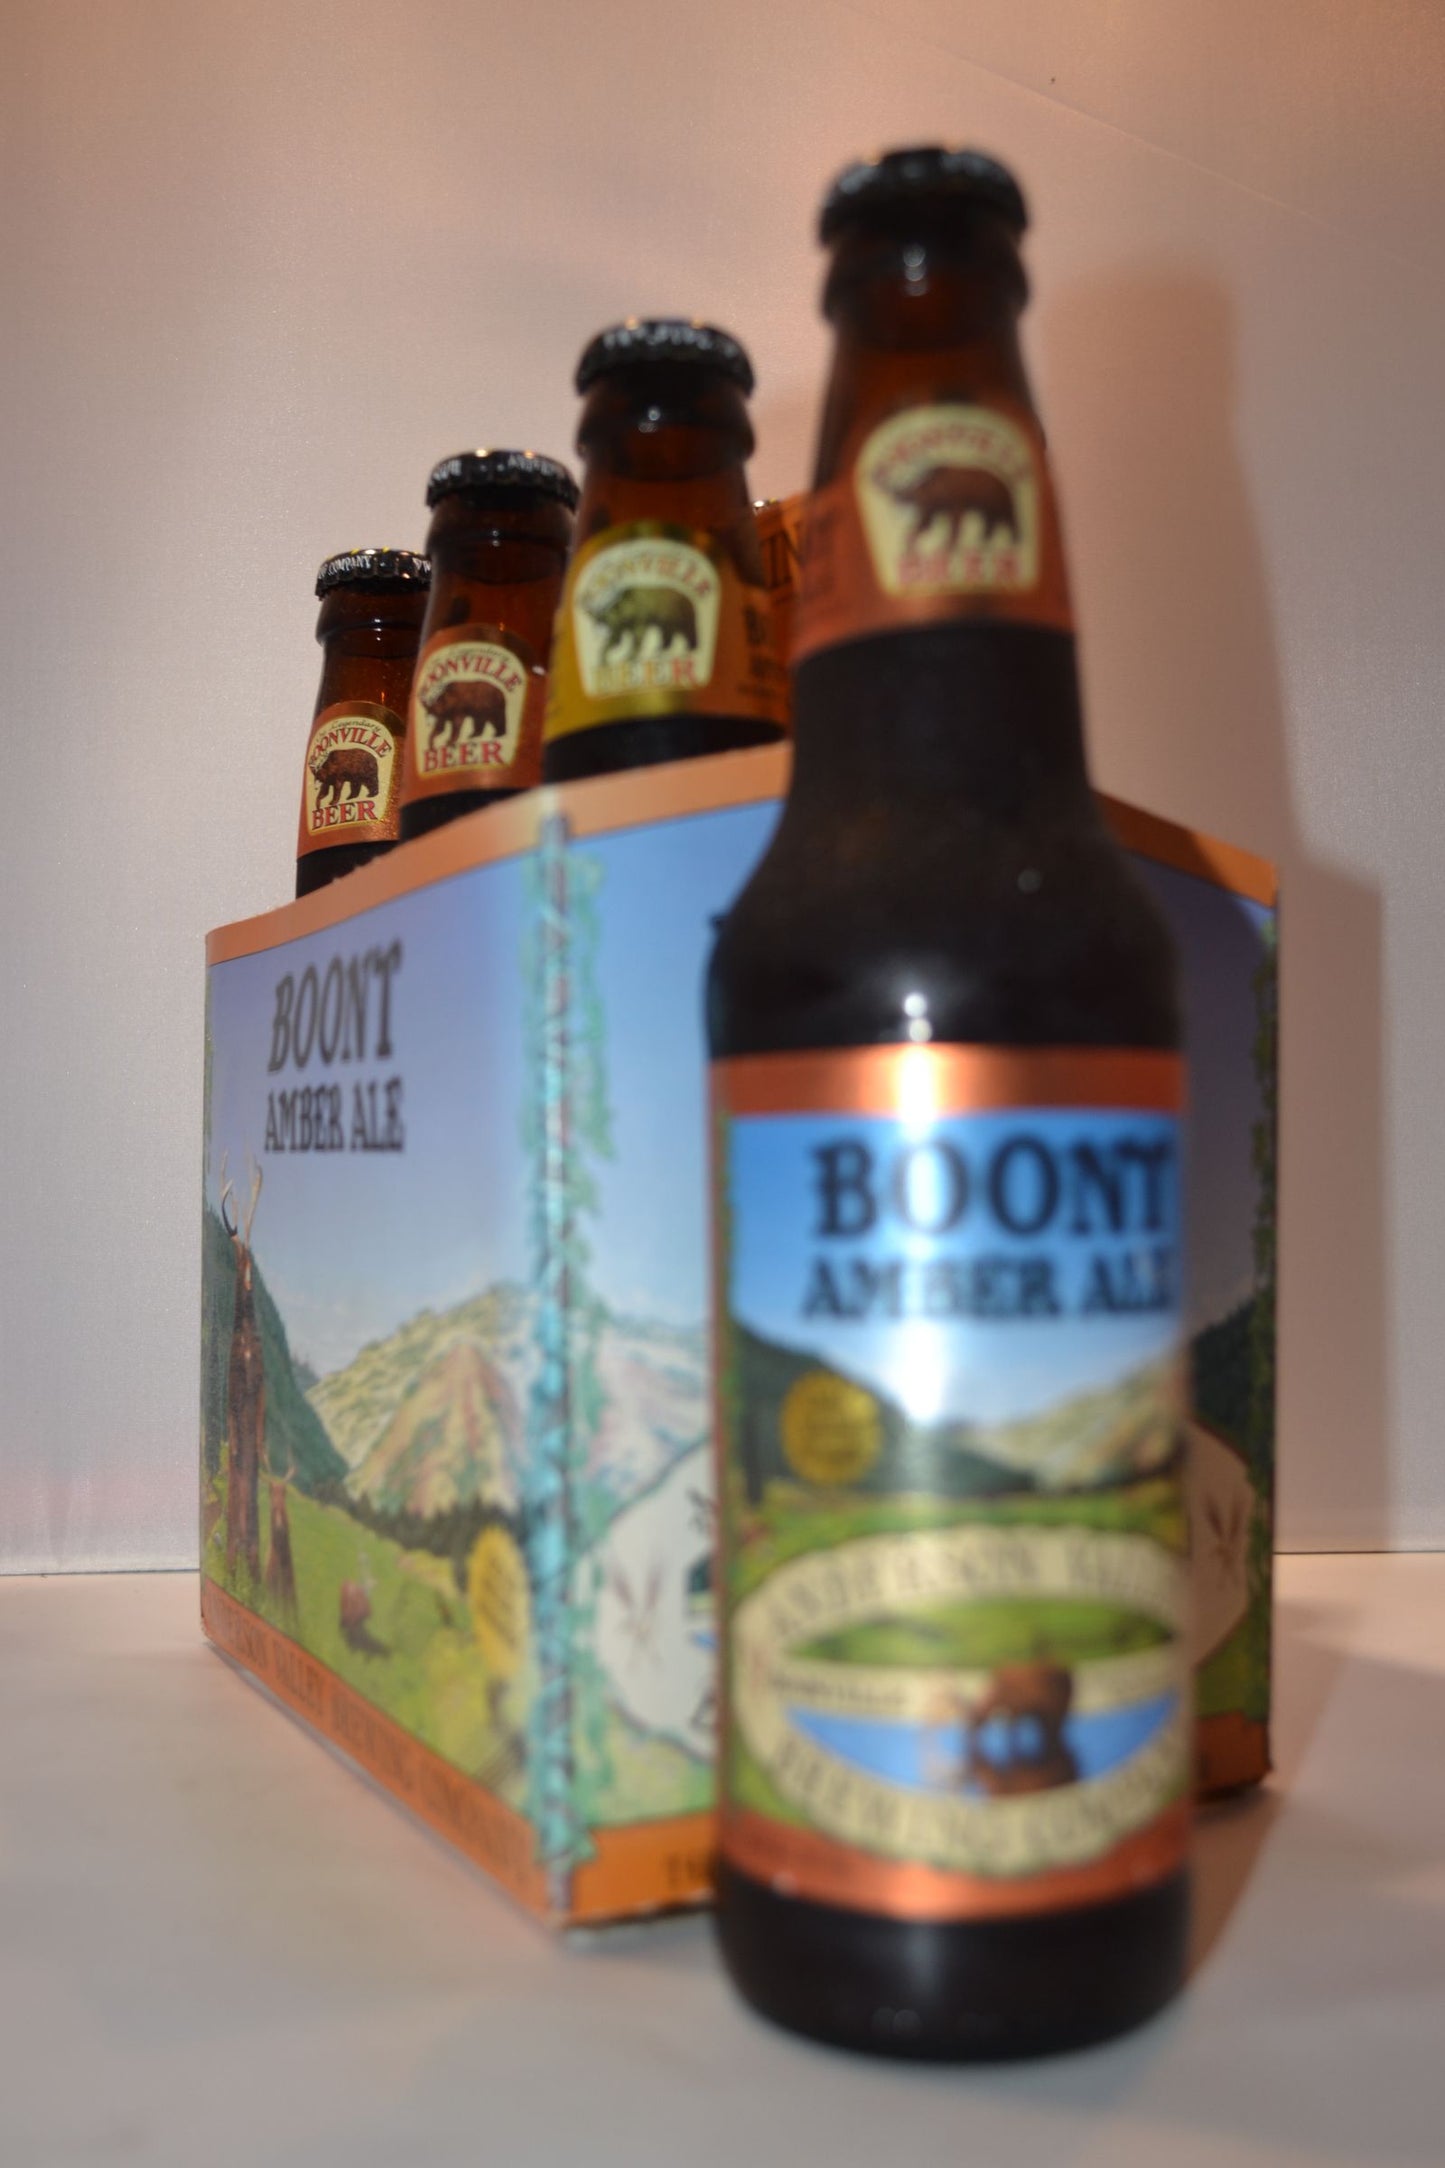 ANDERSON VALLEY BOONT AMBER ALE 6X12